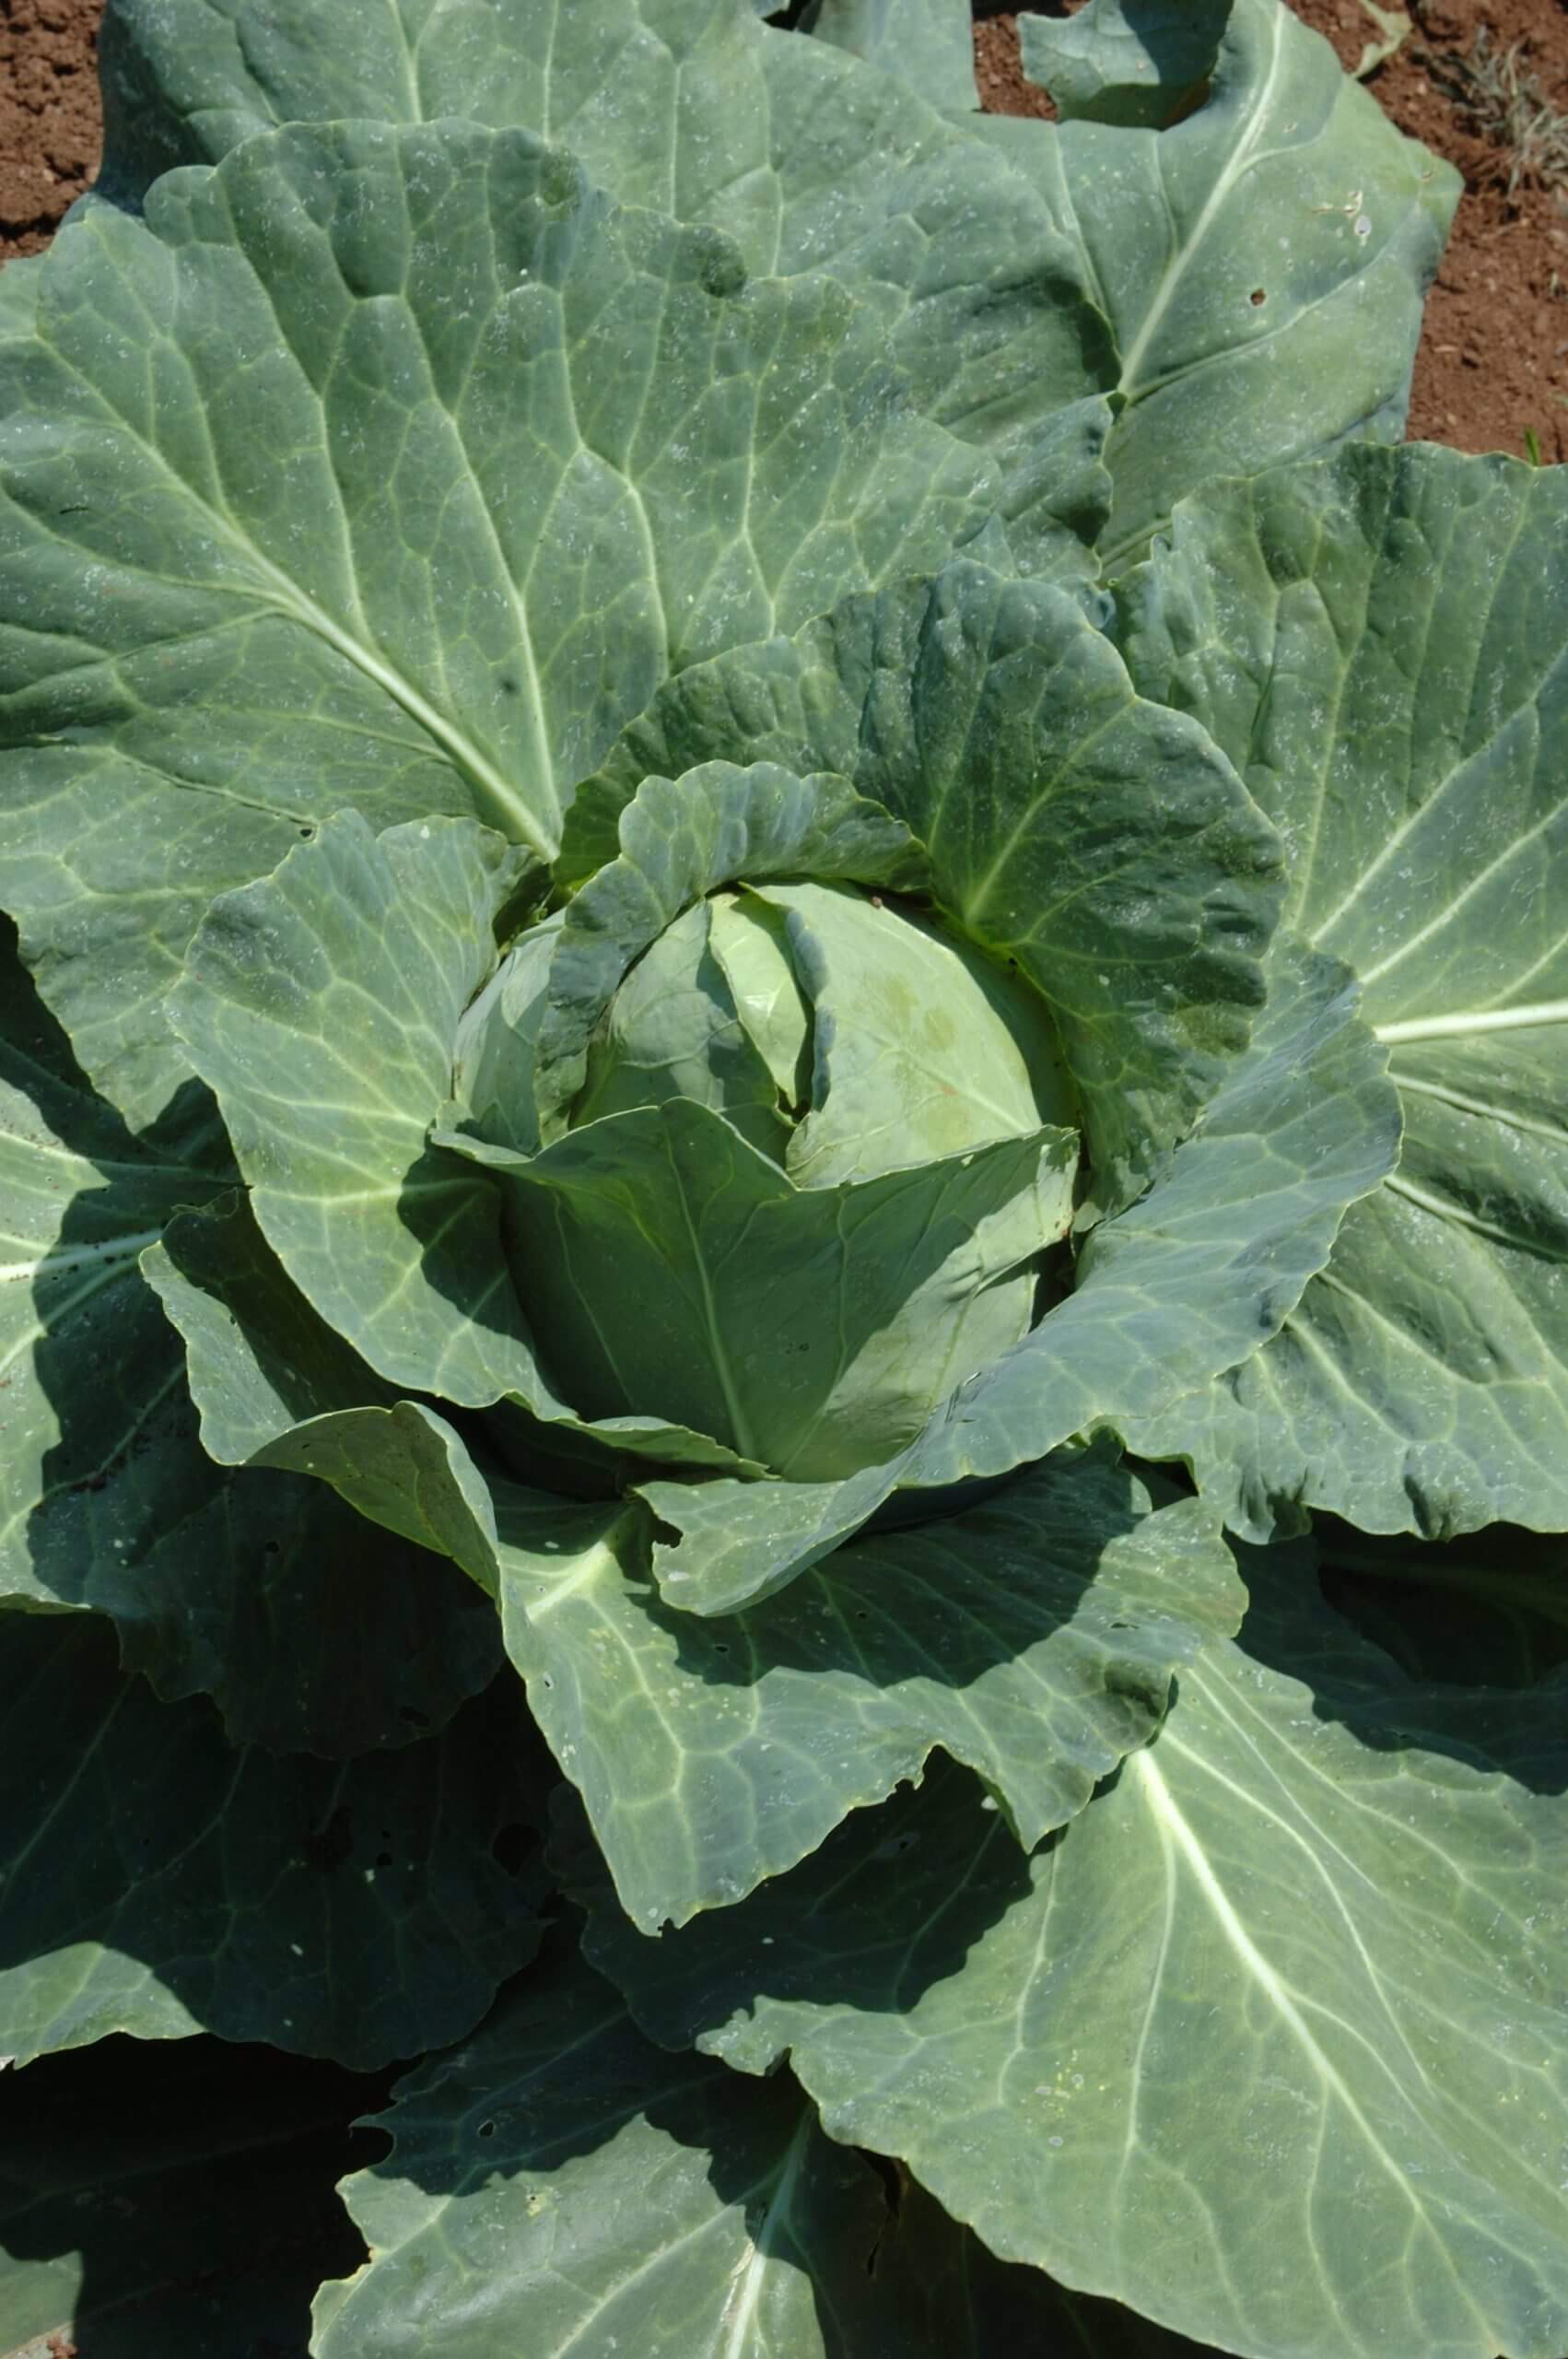 Cabbages, and other cole crops, get sweeter after the first frost.